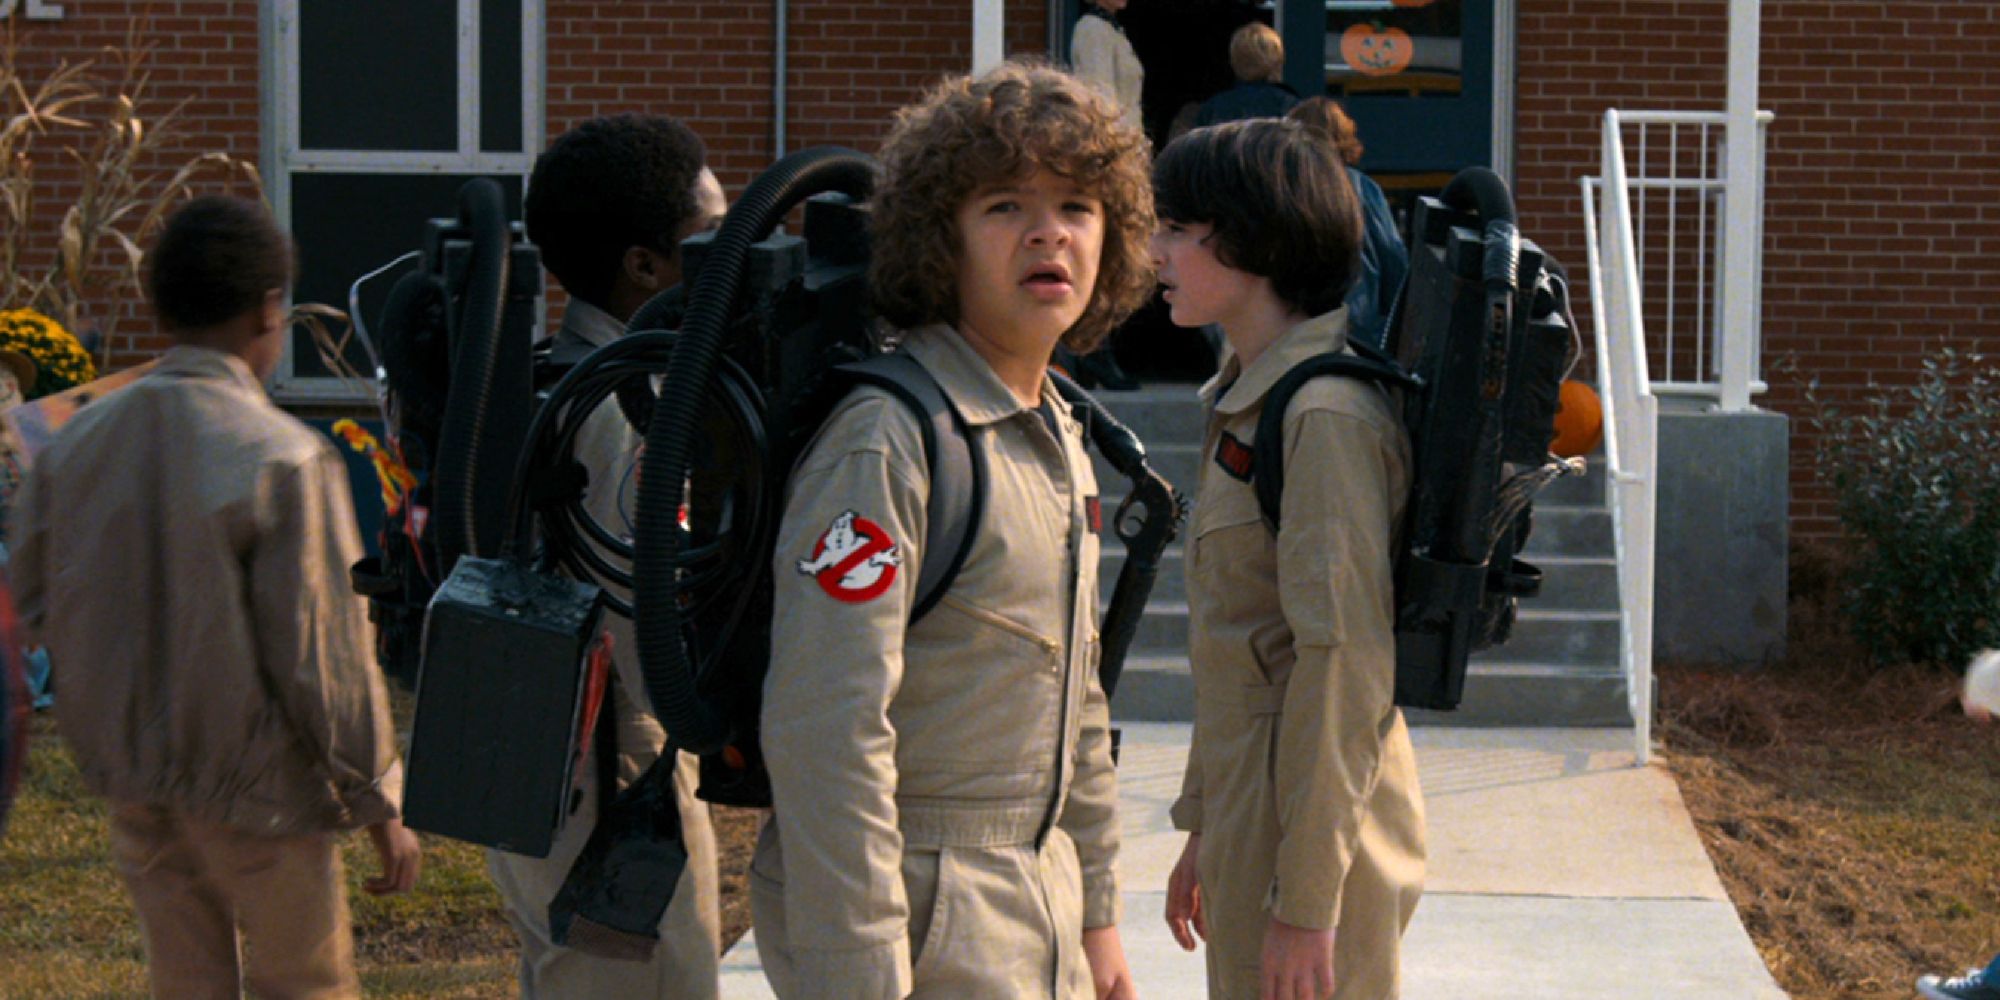 Dustin standing in front of Mike and Lucas, all dressed as Ghostbusters